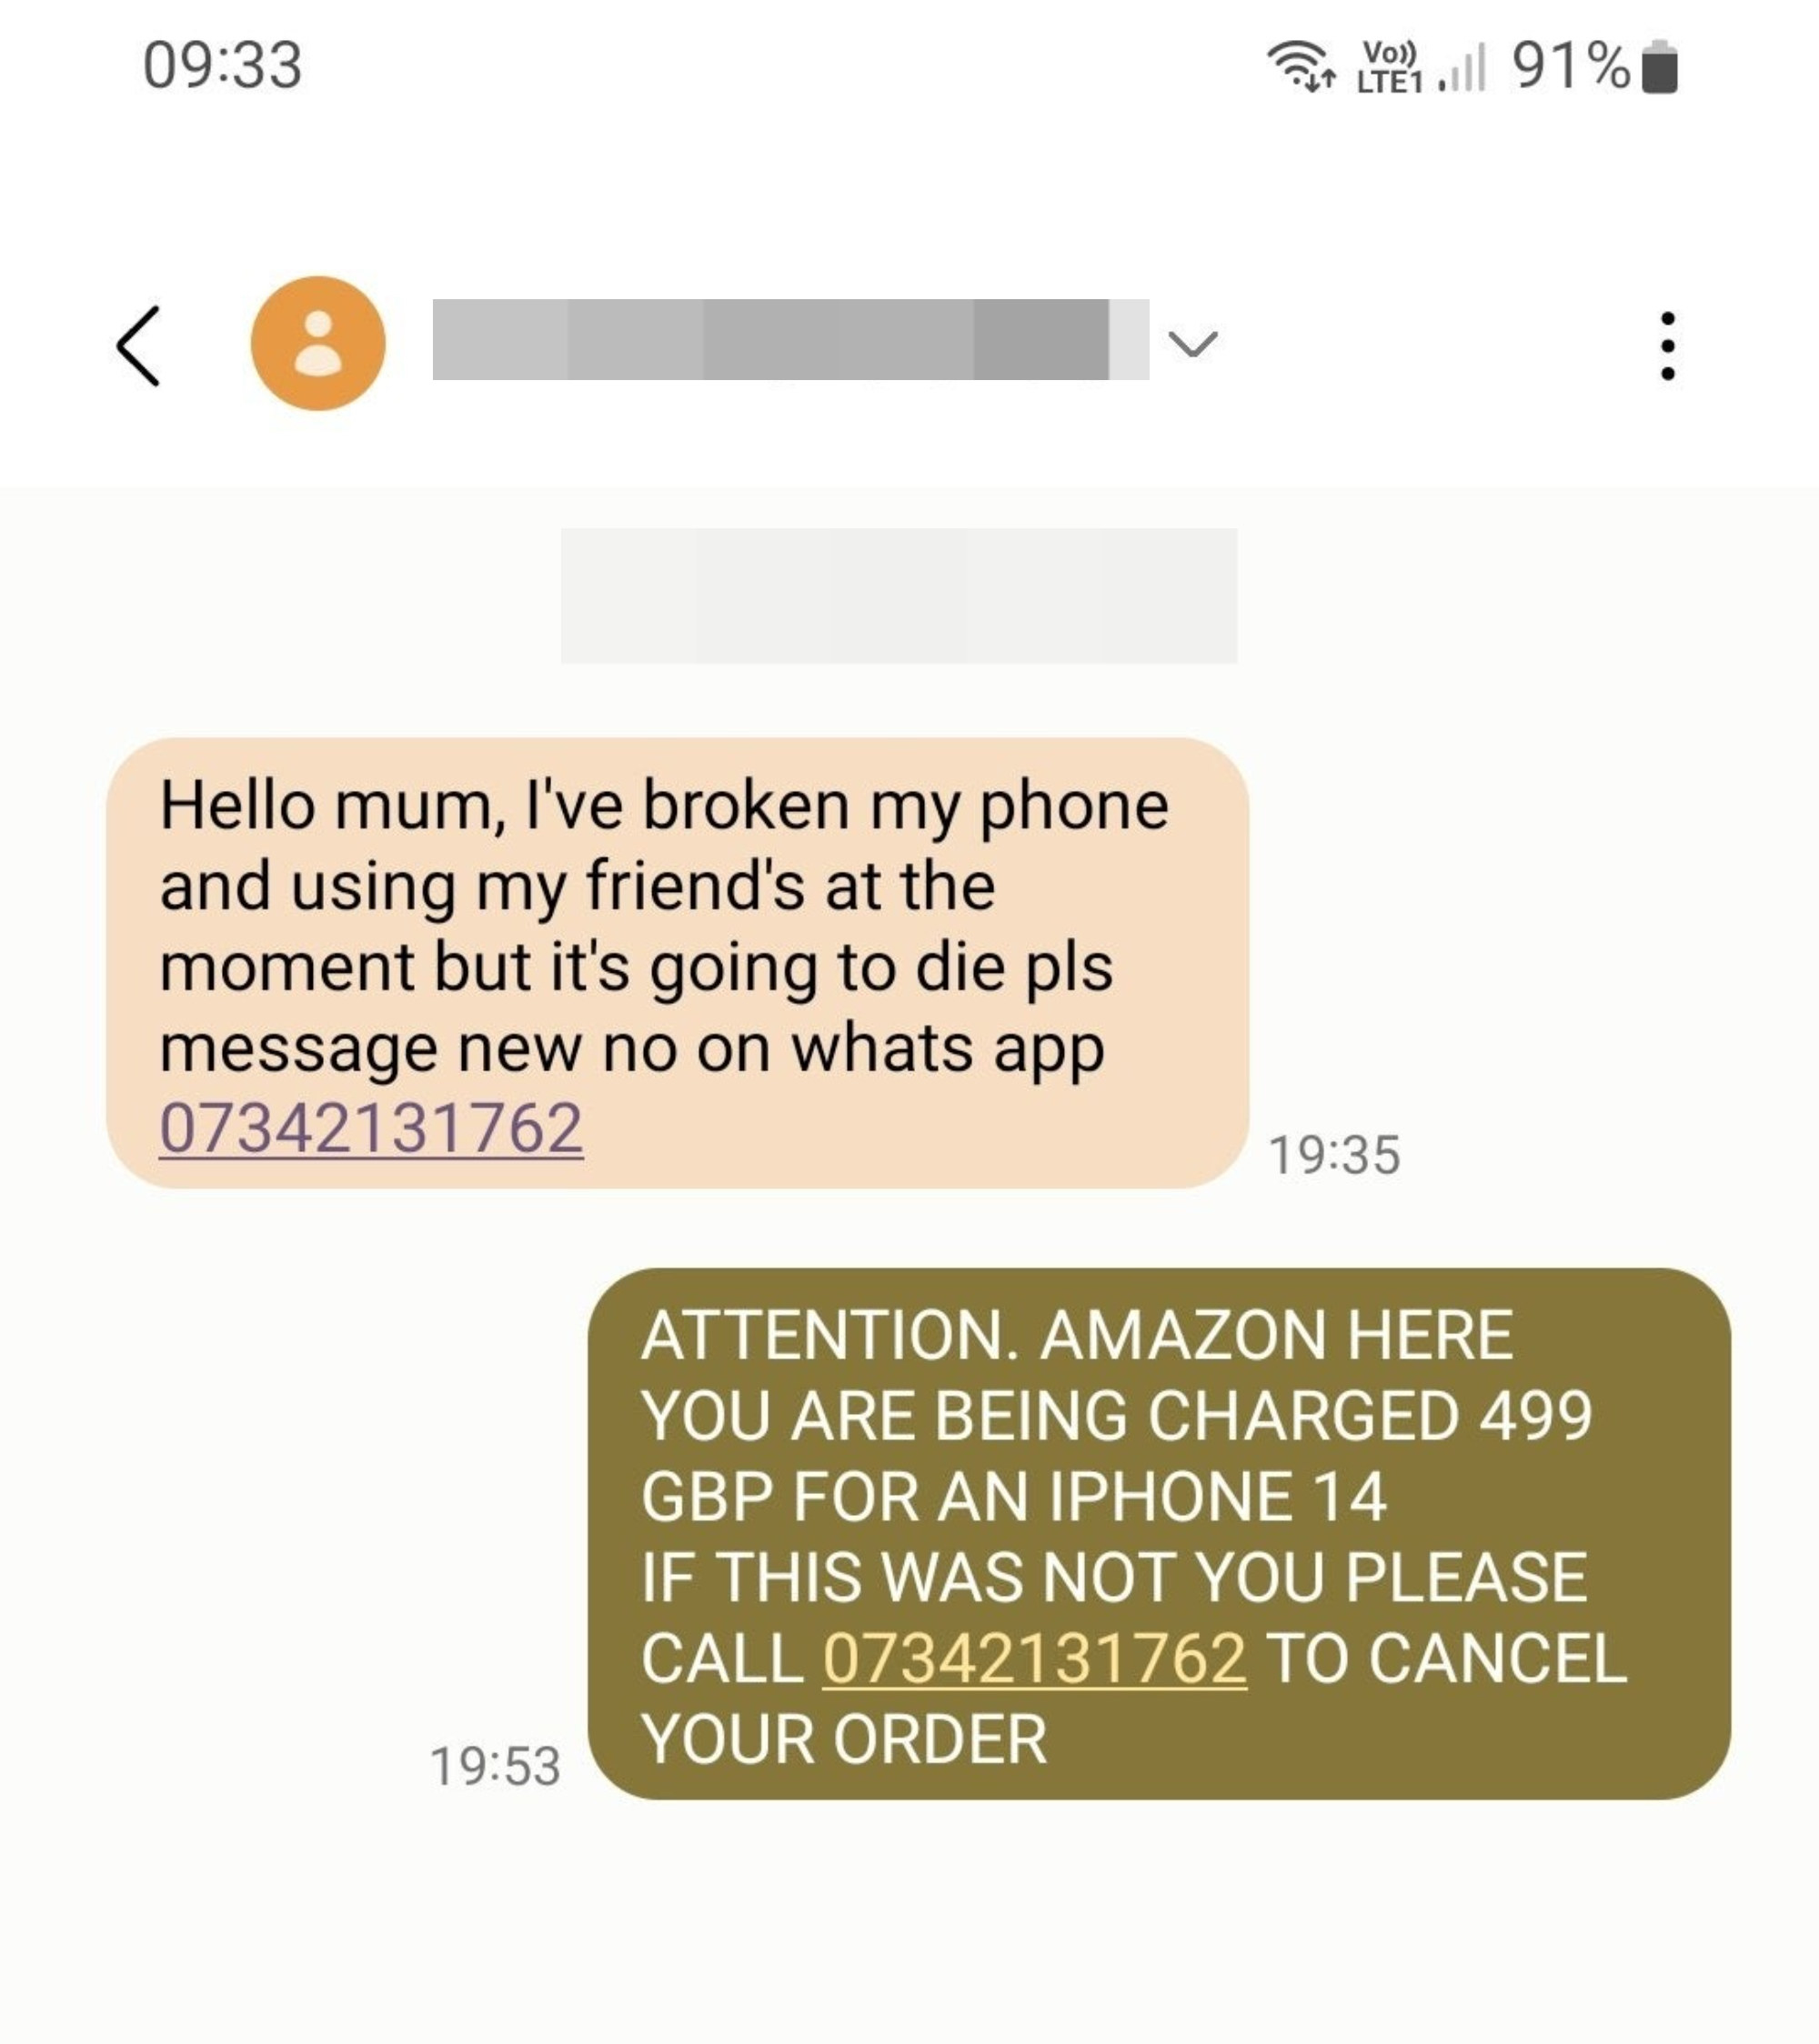 Scammer who gets sent a scam text of their own about being charged for an iPhone 14